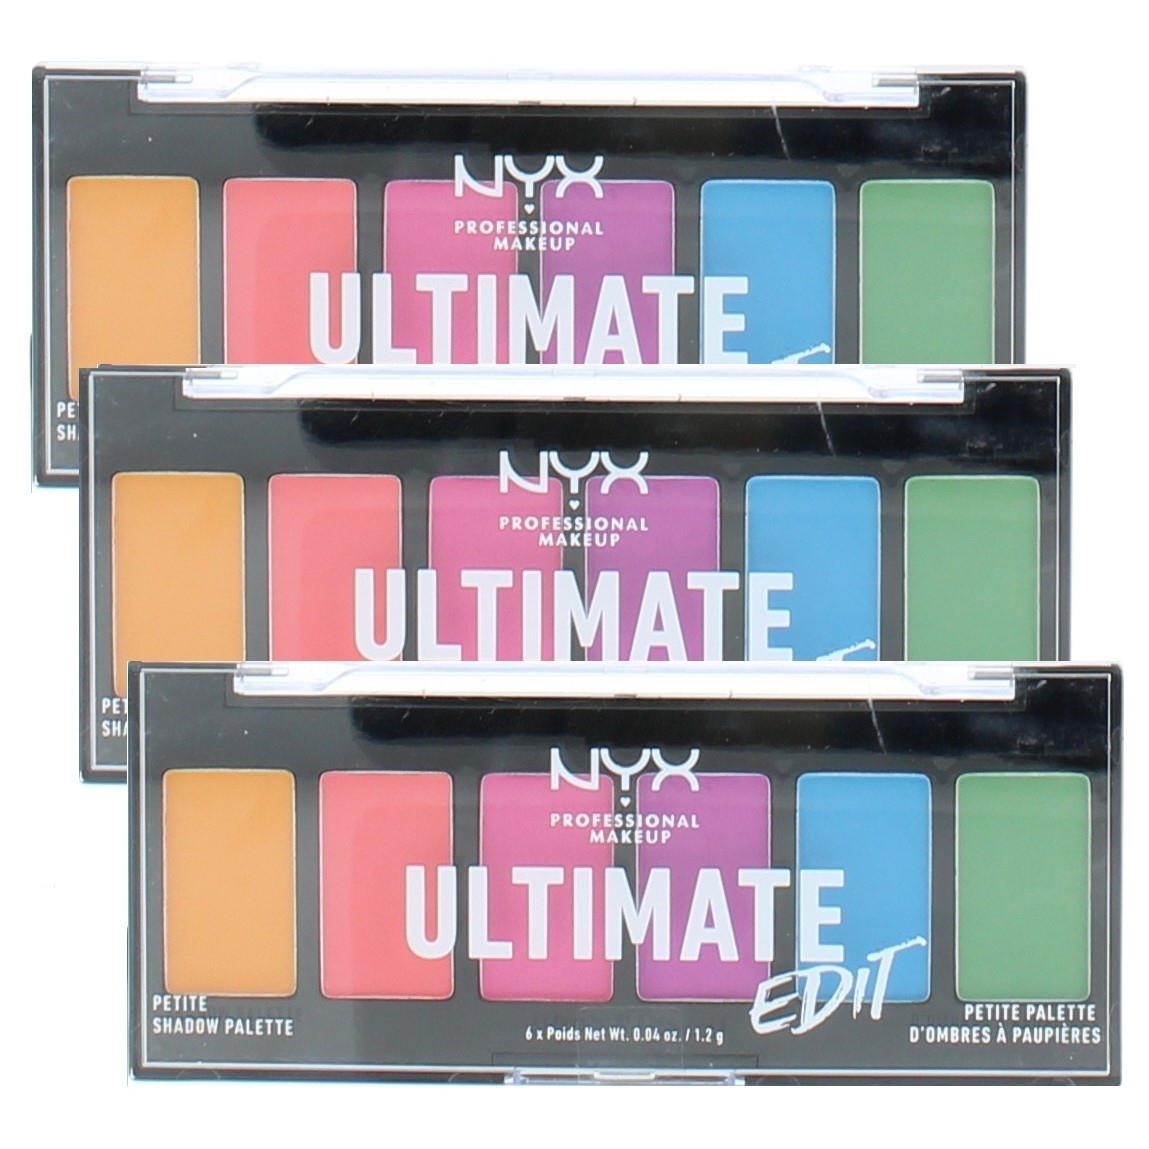 NYX Professional Makeup Ultimate Edit Petite Shadow Palette- Brights (6 Shades X 0.04oz) 0.24oz/7.2g (3 Pack)